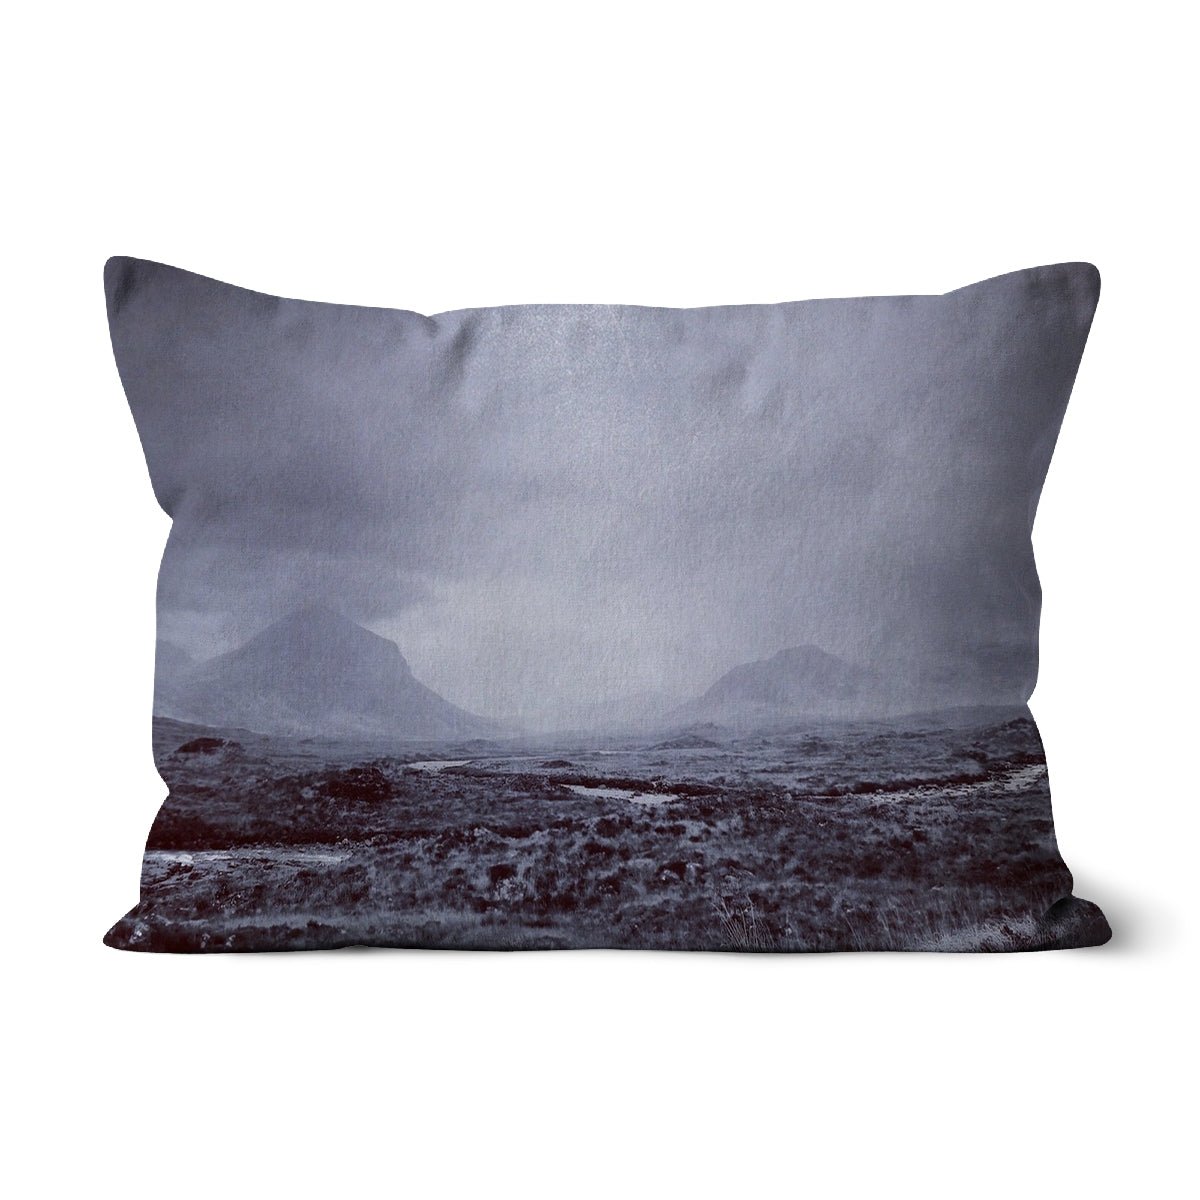 The Brooding Cuillin Skye Art Gifts Cushion-Cushions-Skye Art Gallery-Linen-19"x13"-Paintings, Prints, Homeware, Art Gifts From Scotland By Scottish Artist Kevin Hunter